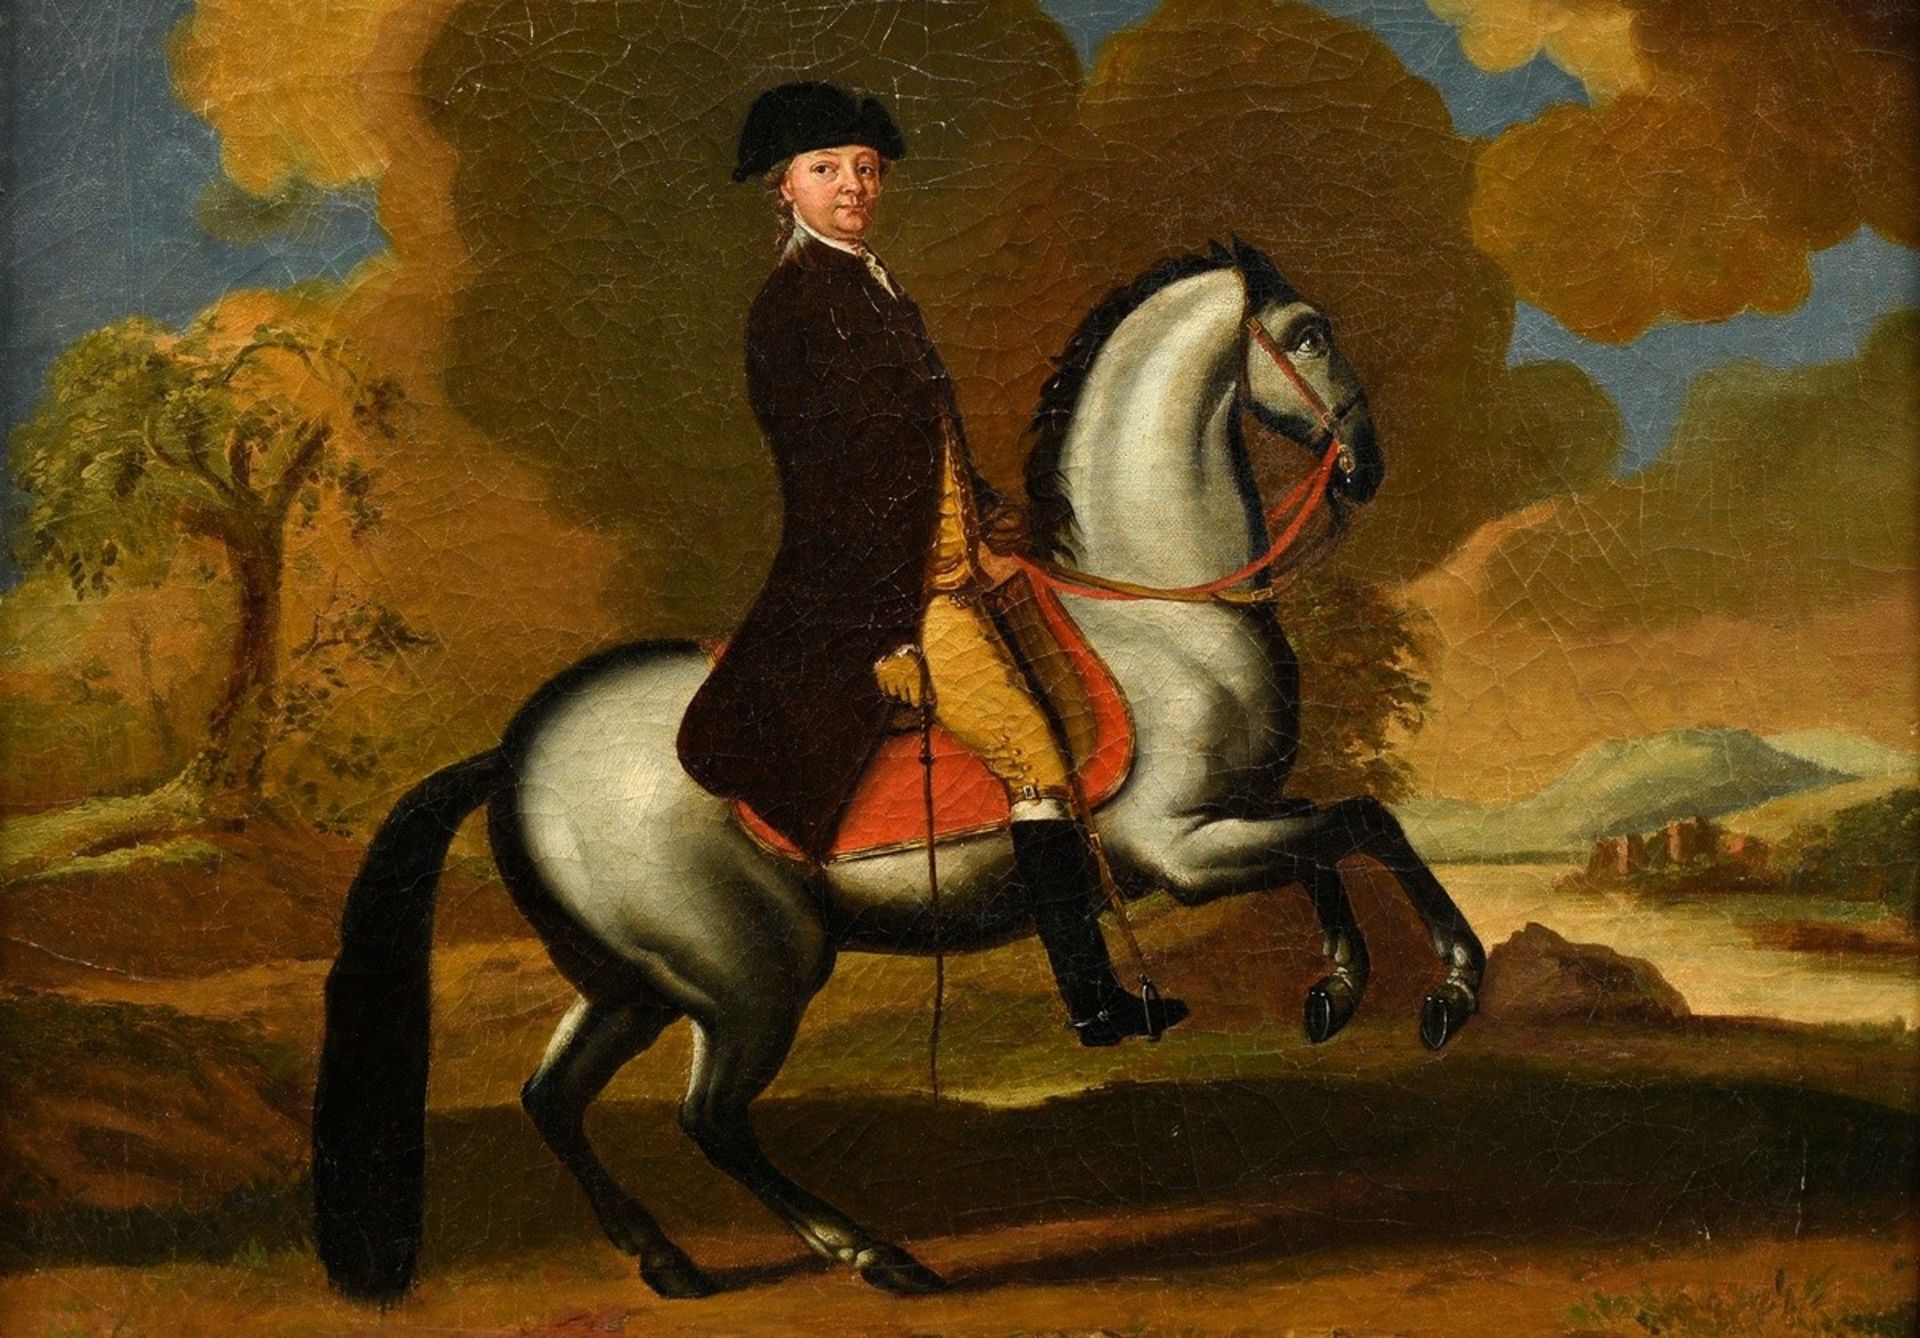 Beckenkamp, Benedikt (1747-1828) "Rider of the Elector's Court Stables at the Kurtrierer Court in E